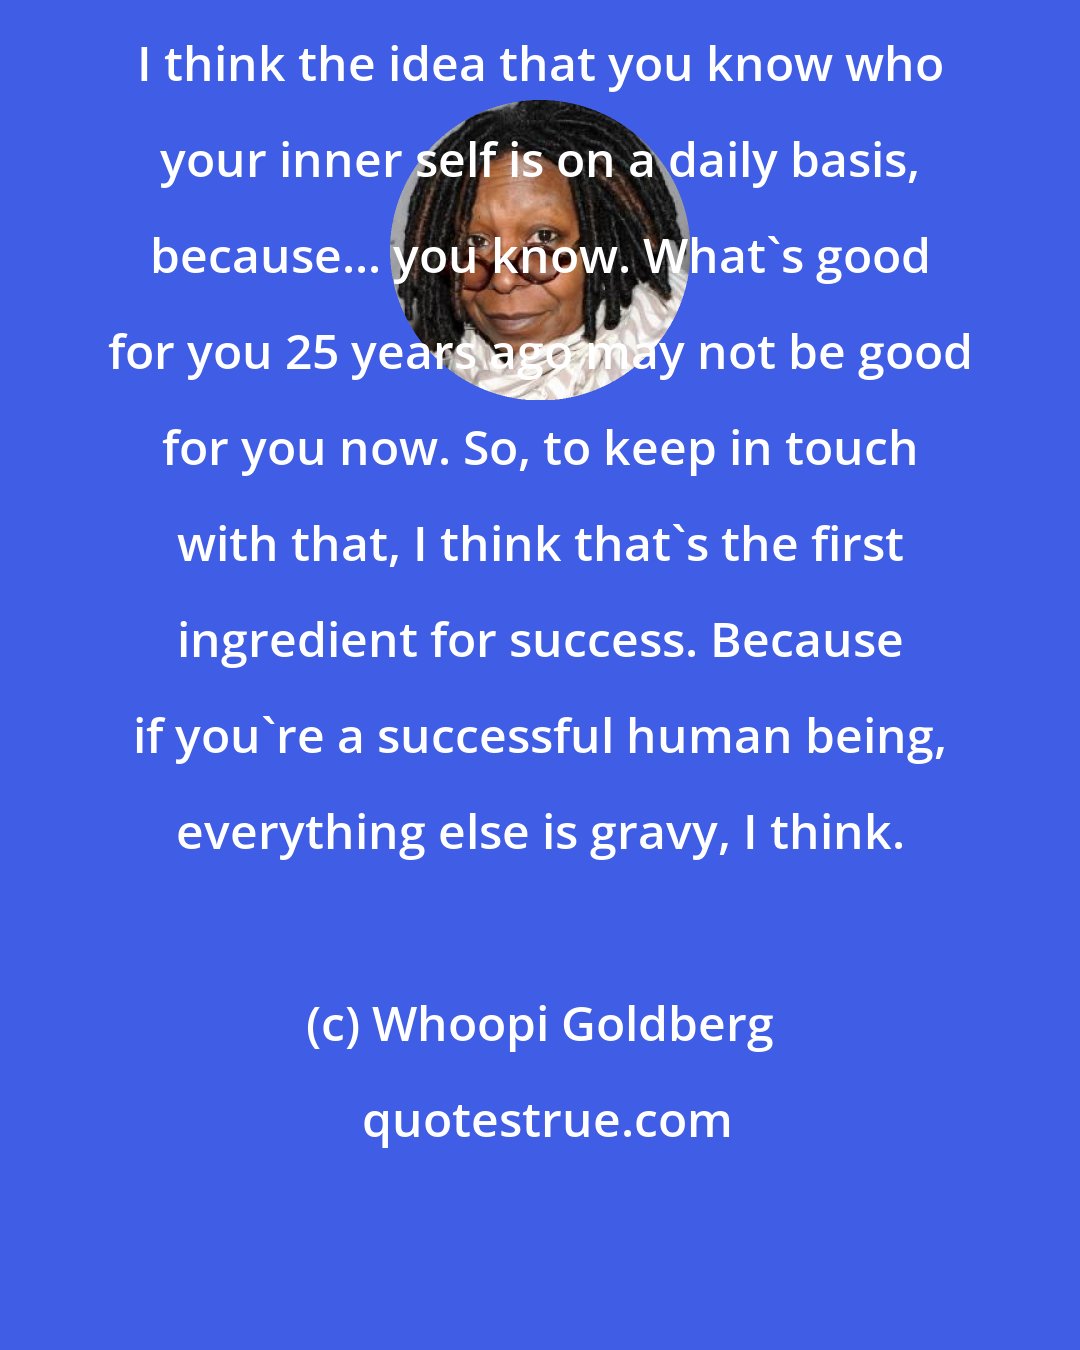 Whoopi Goldberg: I think the idea that you know who your inner self is on a daily basis, because... you know. What's good for you 25 years ago may not be good for you now. So, to keep in touch with that, I think that's the first ingredient for success. Because if you're a successful human being, everything else is gravy, I think.